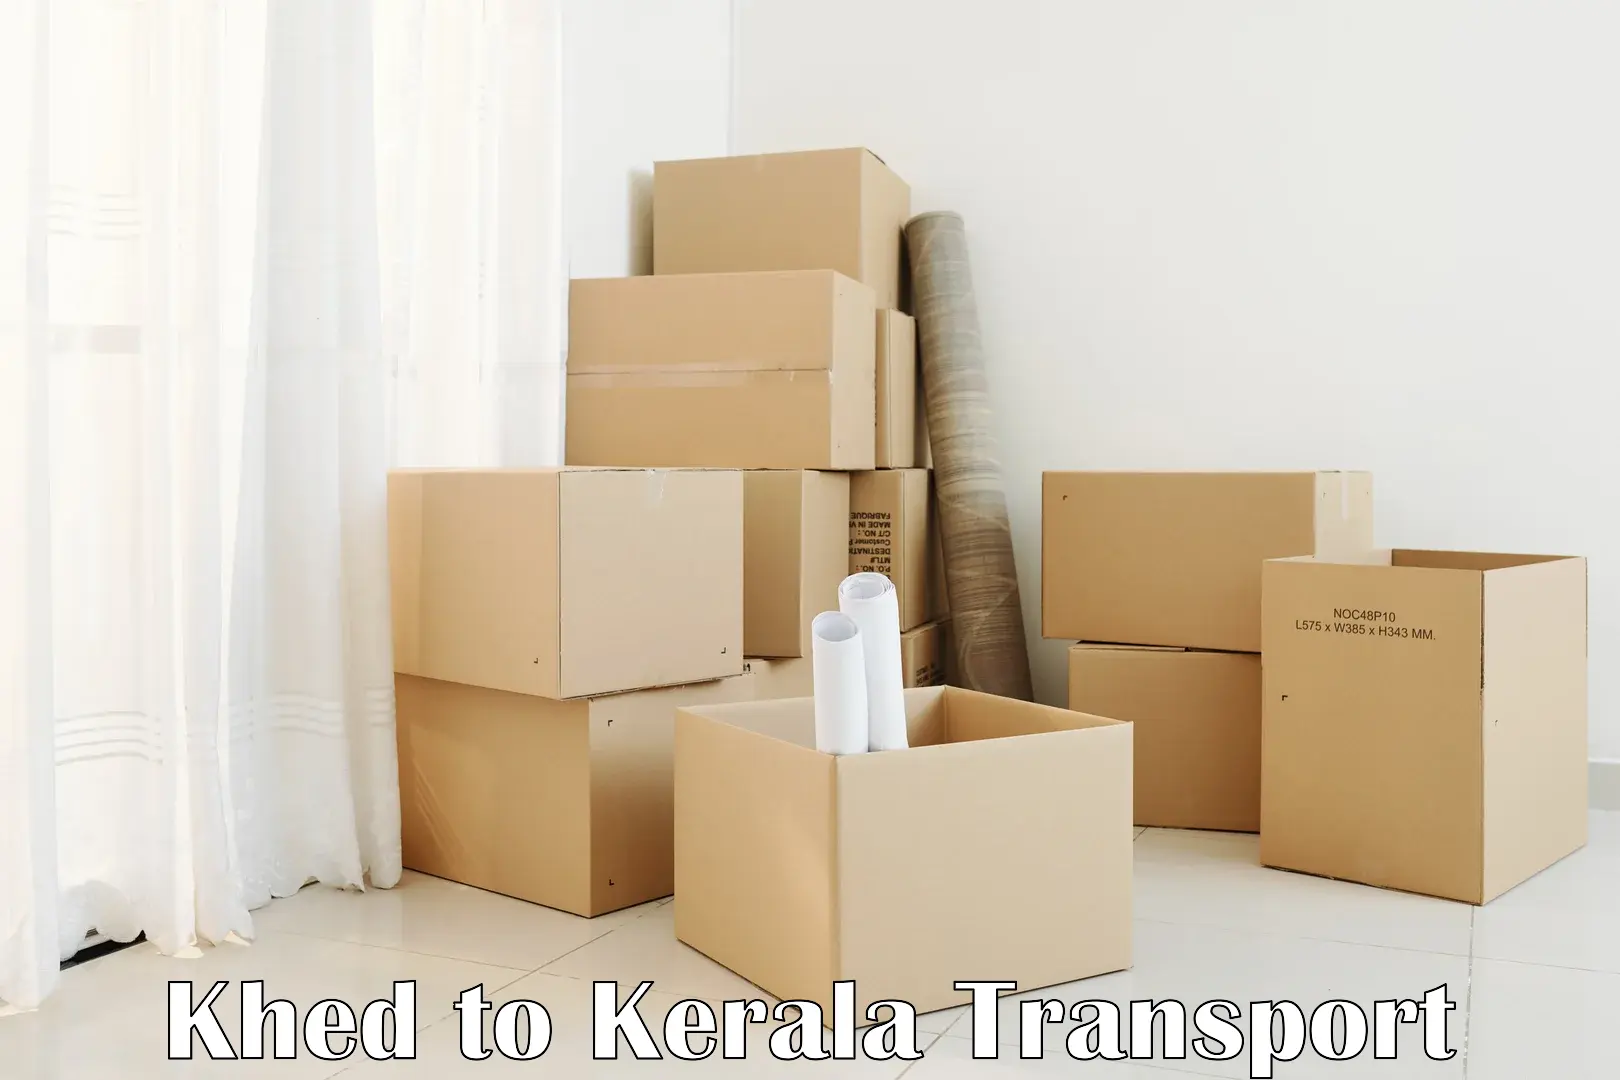 Delivery service Khed to Karukachal